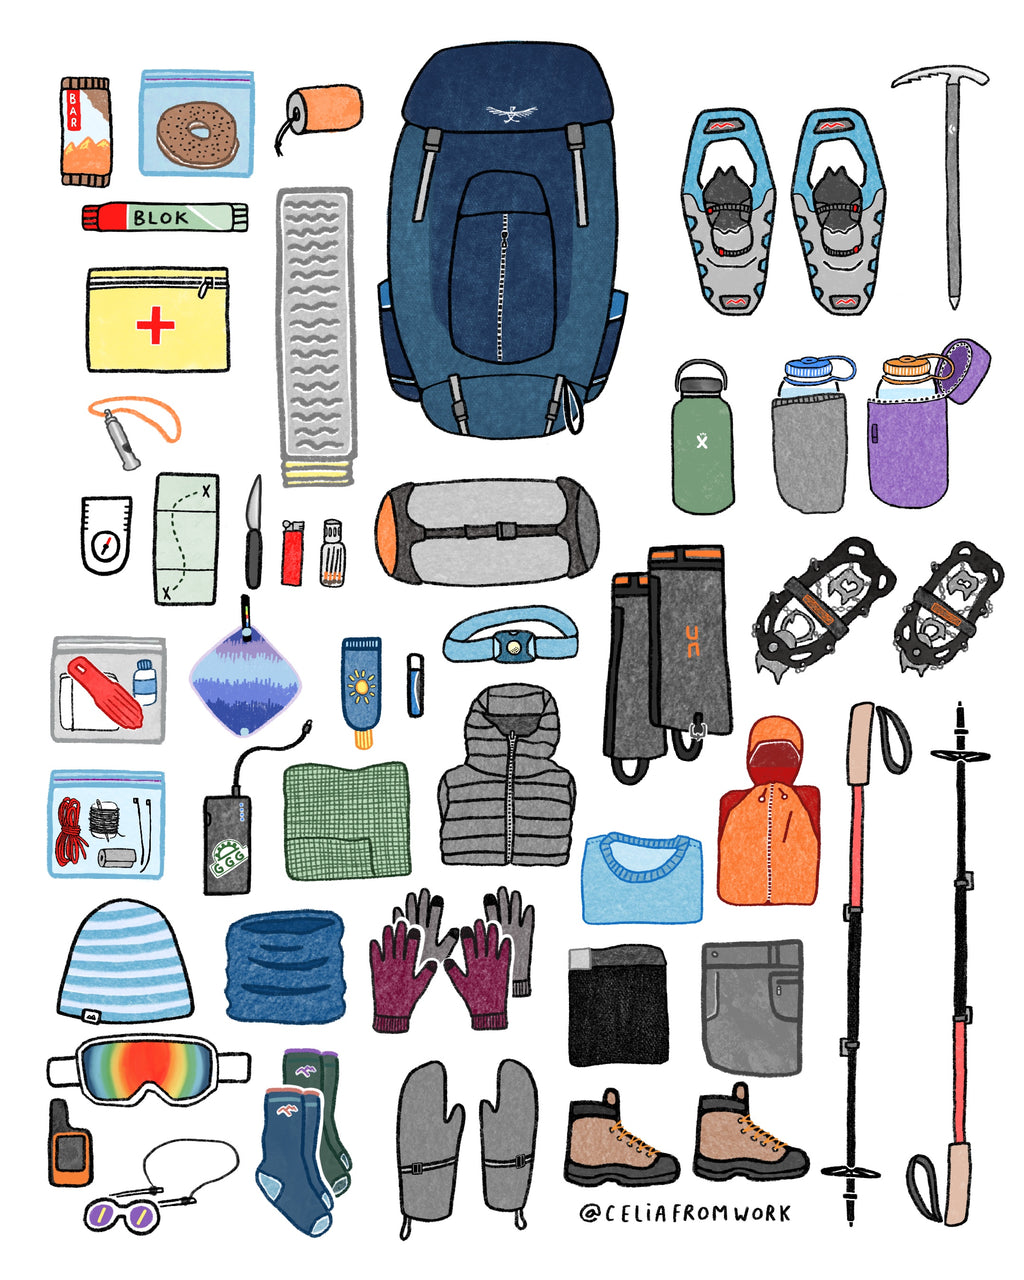 The 10 Hiking Essentials You Need to Safely Hit the Trail - Fresh